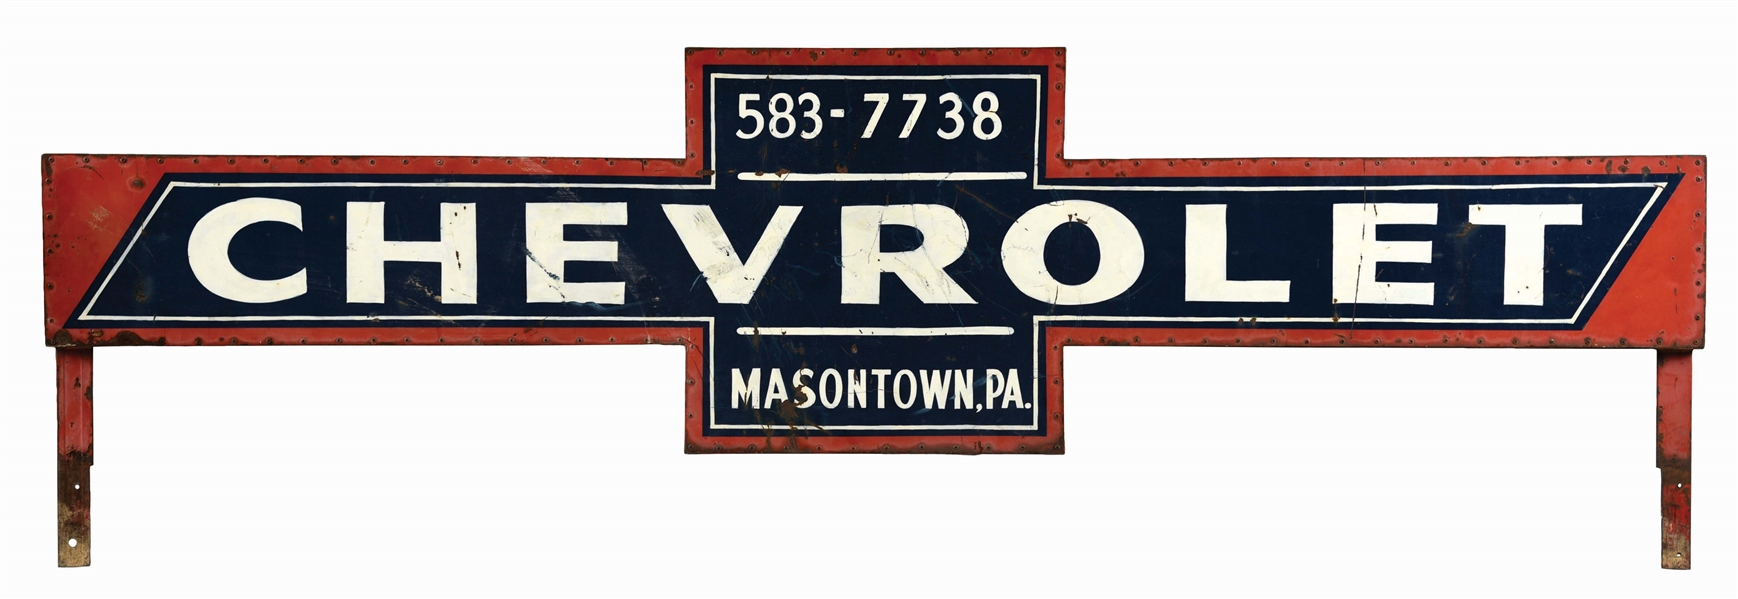 CHEVROLET DEALERSHIP HAND PAINTED PANEL TIN SIGN W/ METAL BACKING. 